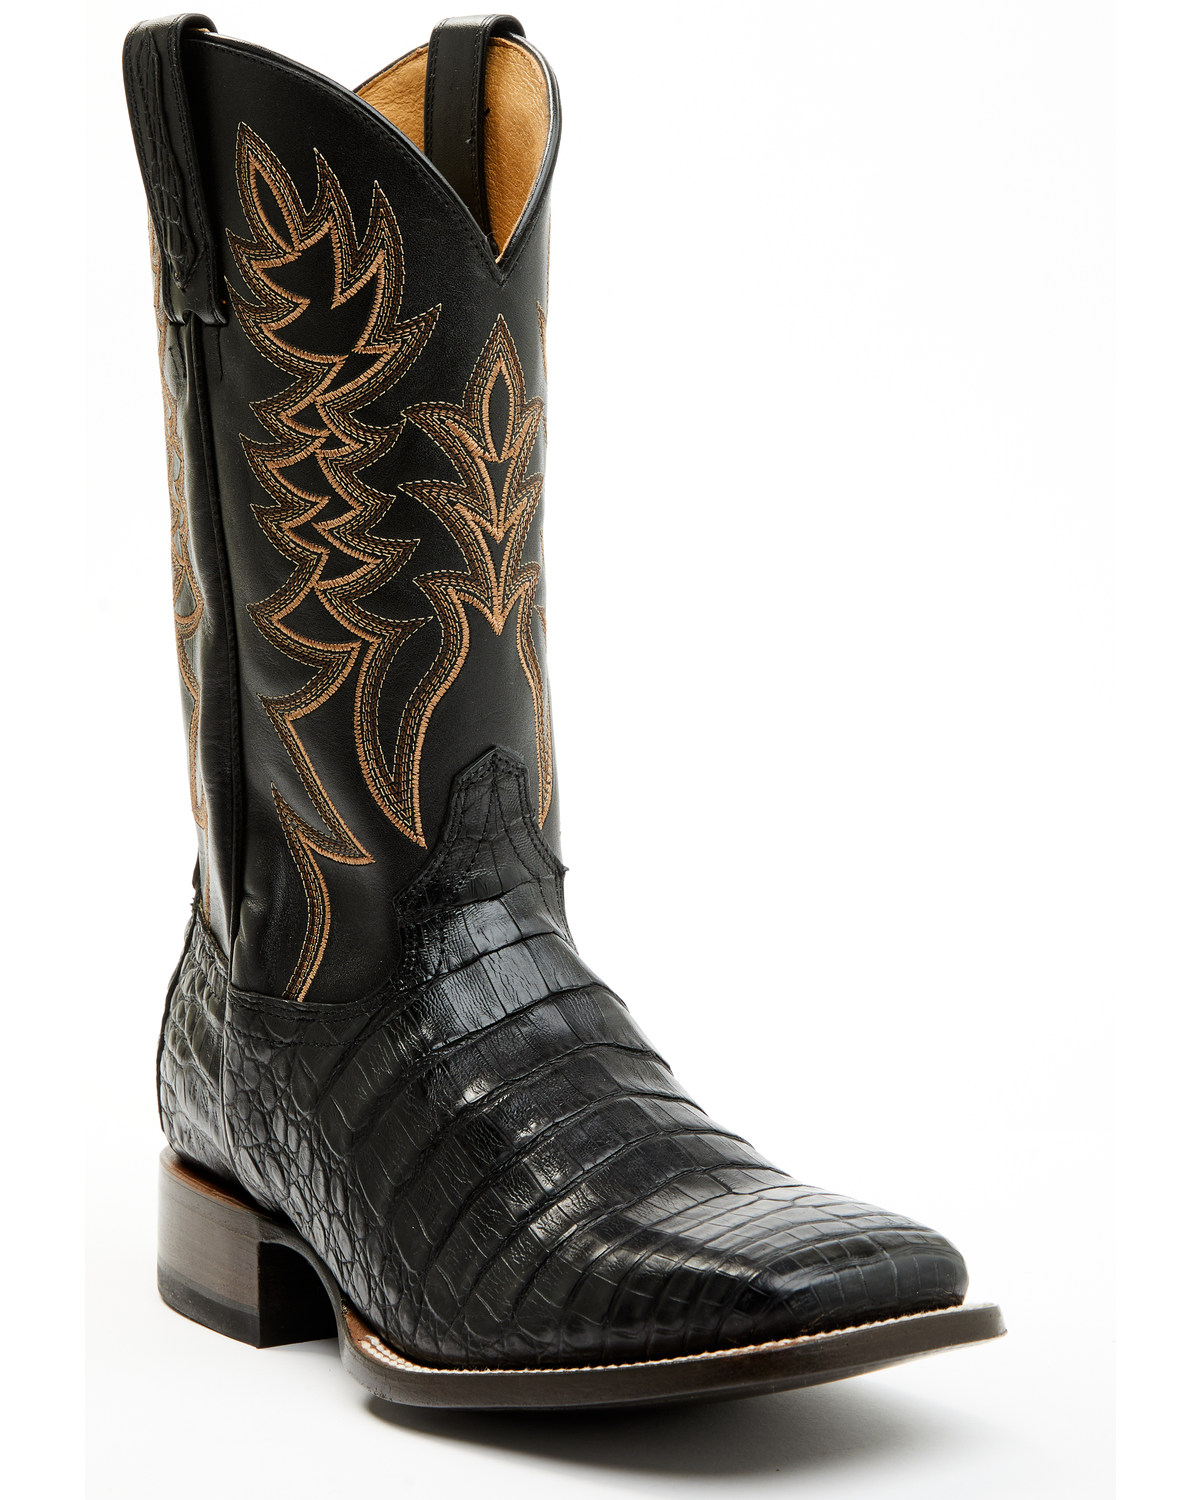 Cody James Men's Exotic Caiman Belly Western Boots - Broad Square Toe